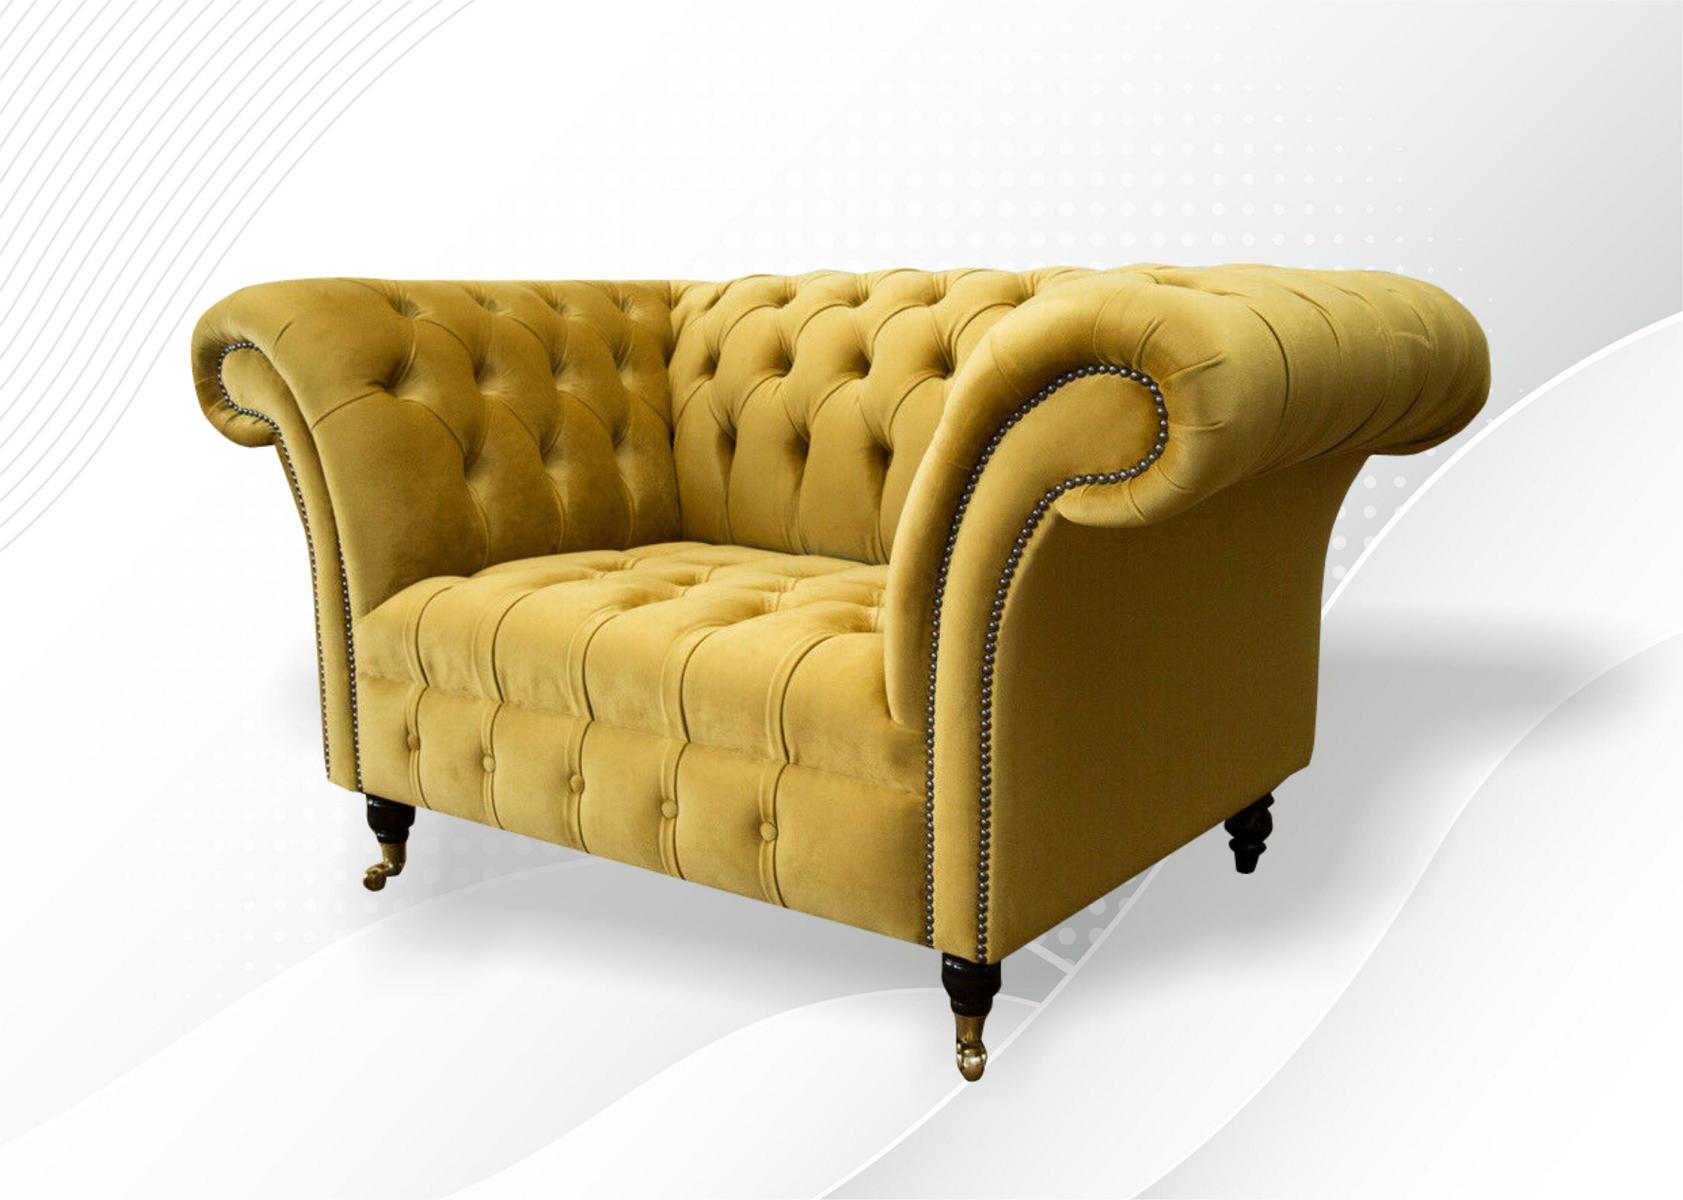 Klassische Chesterfield Sessel Couch Sofa Polster Sitz Lounge Relax Club